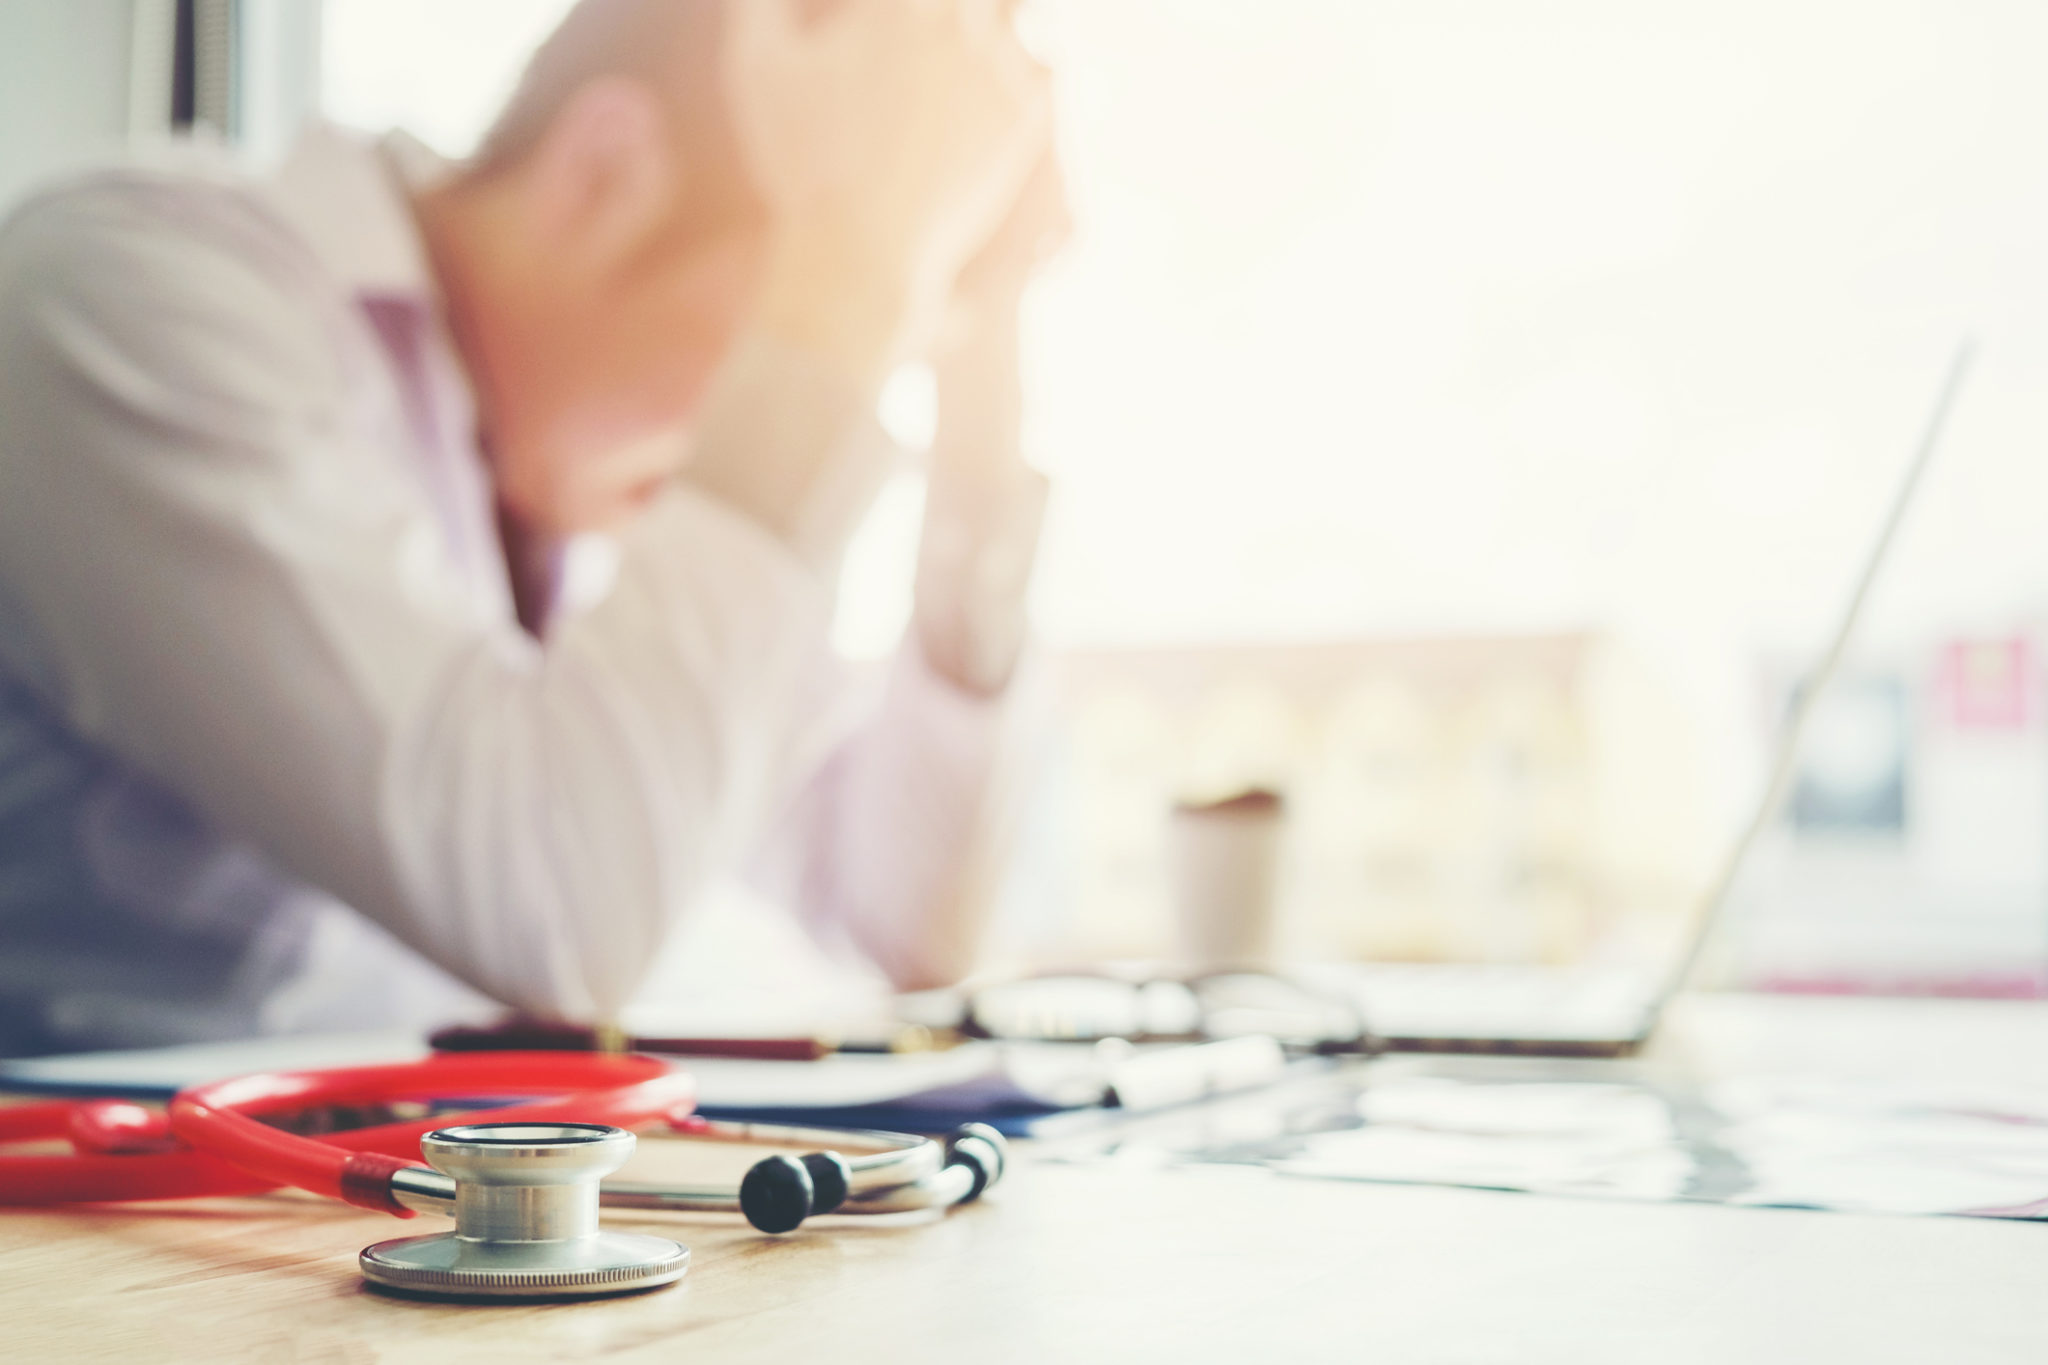 Hospitalist Perspectives: Taking action on doctor burnout